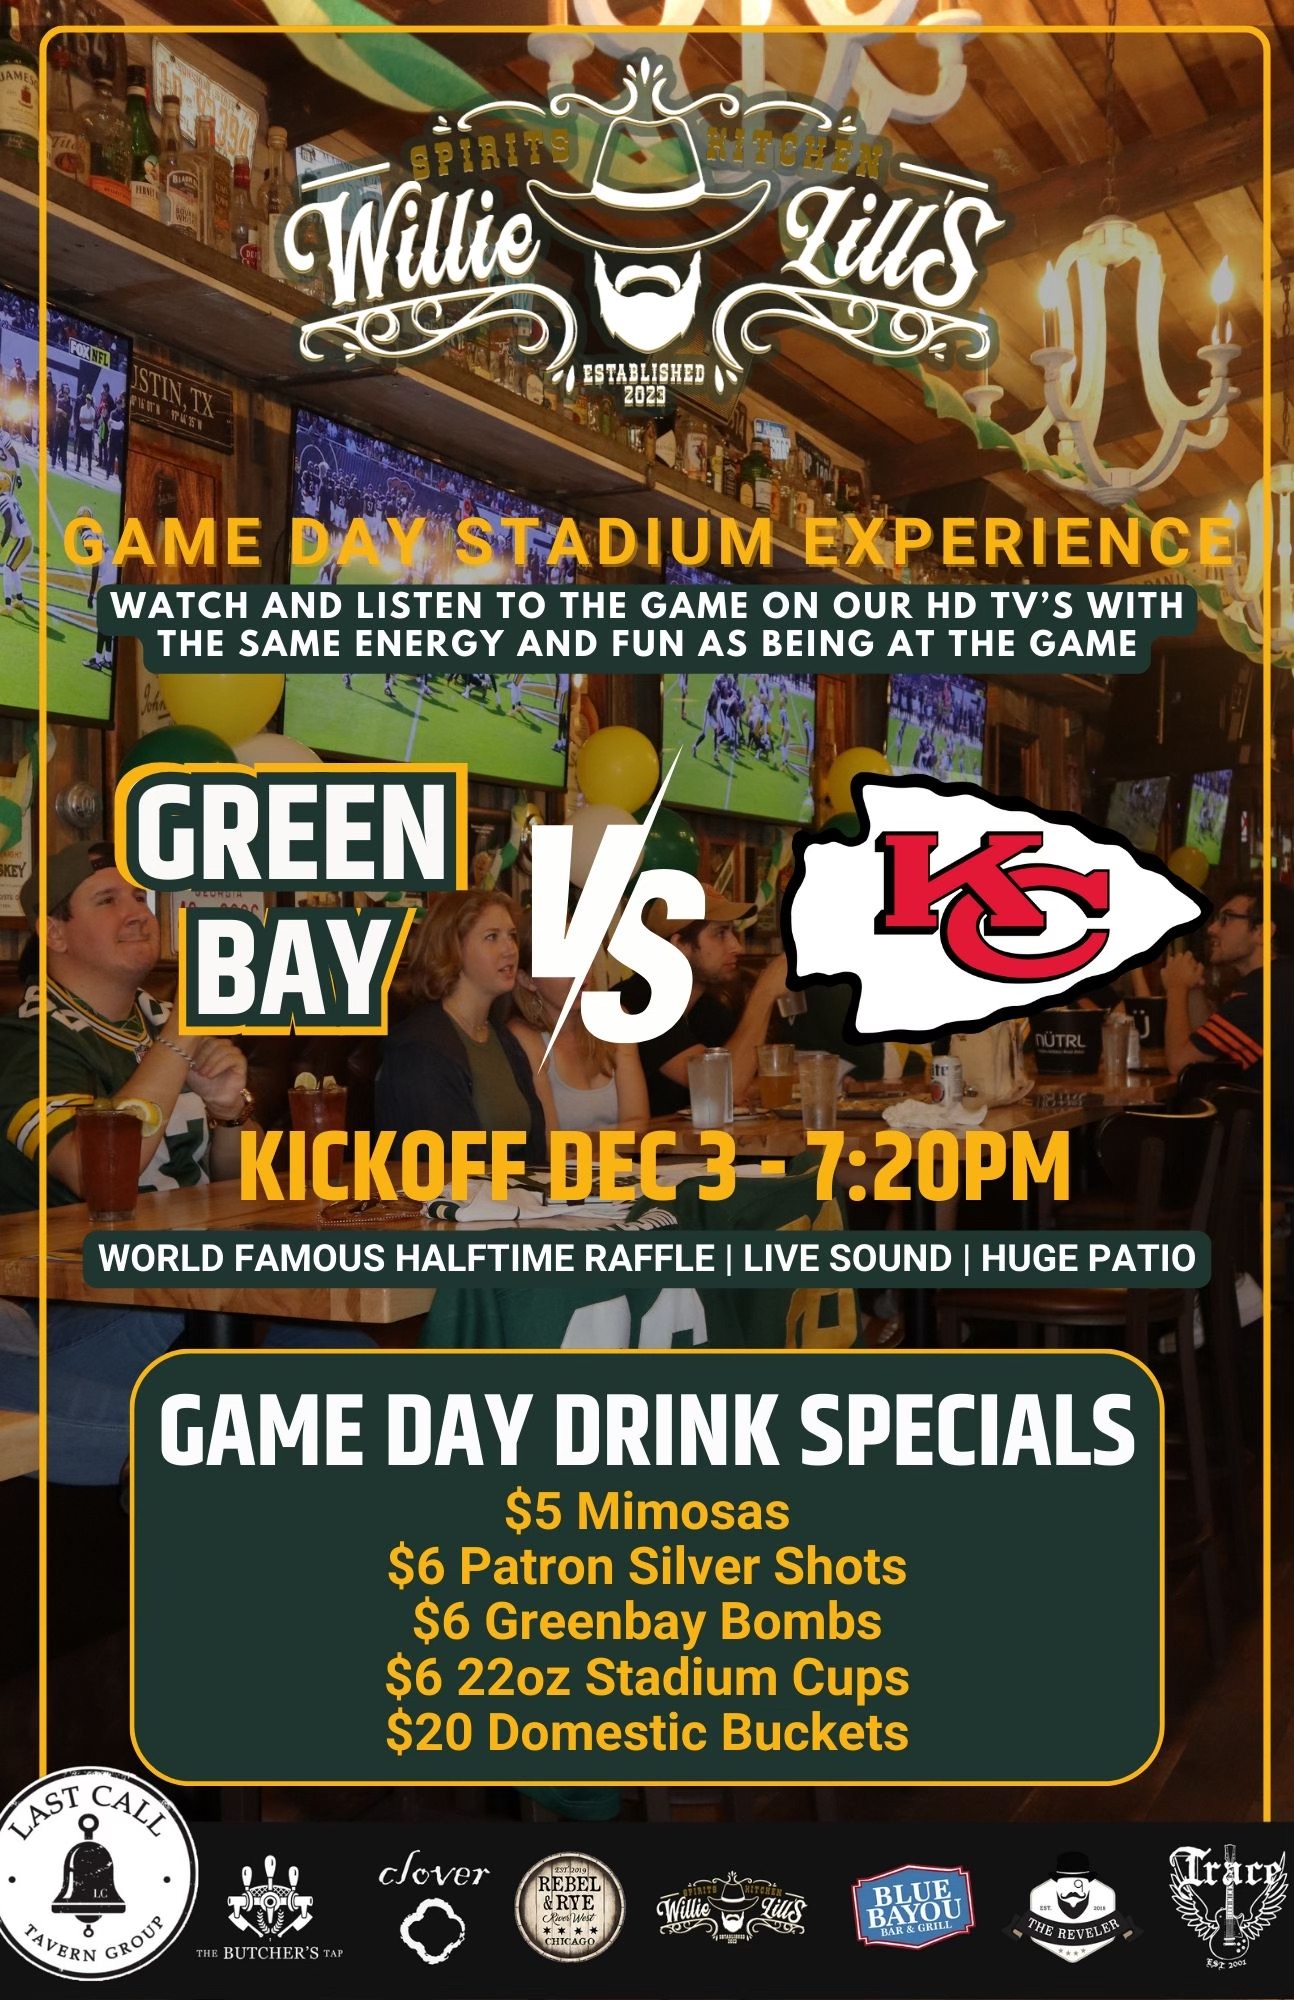 Your Home for Green Bay Football Games In Chicago-Wille Lill's